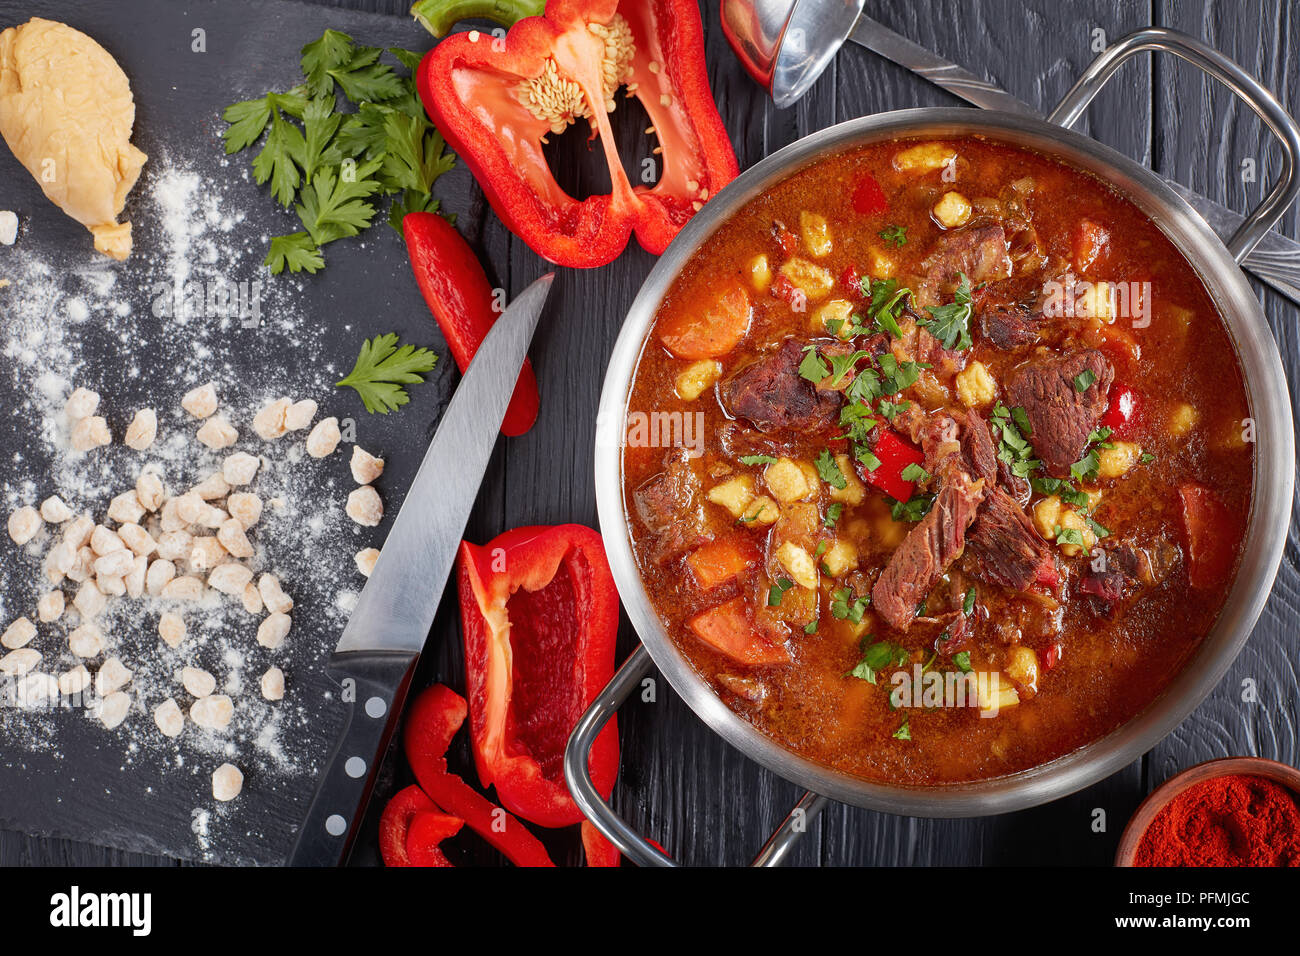 delicious hot beef hungarian goulash with paprika, small egg pasta, vegetables and spices in a pot. ingredients and kitchen ladle on table, classic re Stock Photo